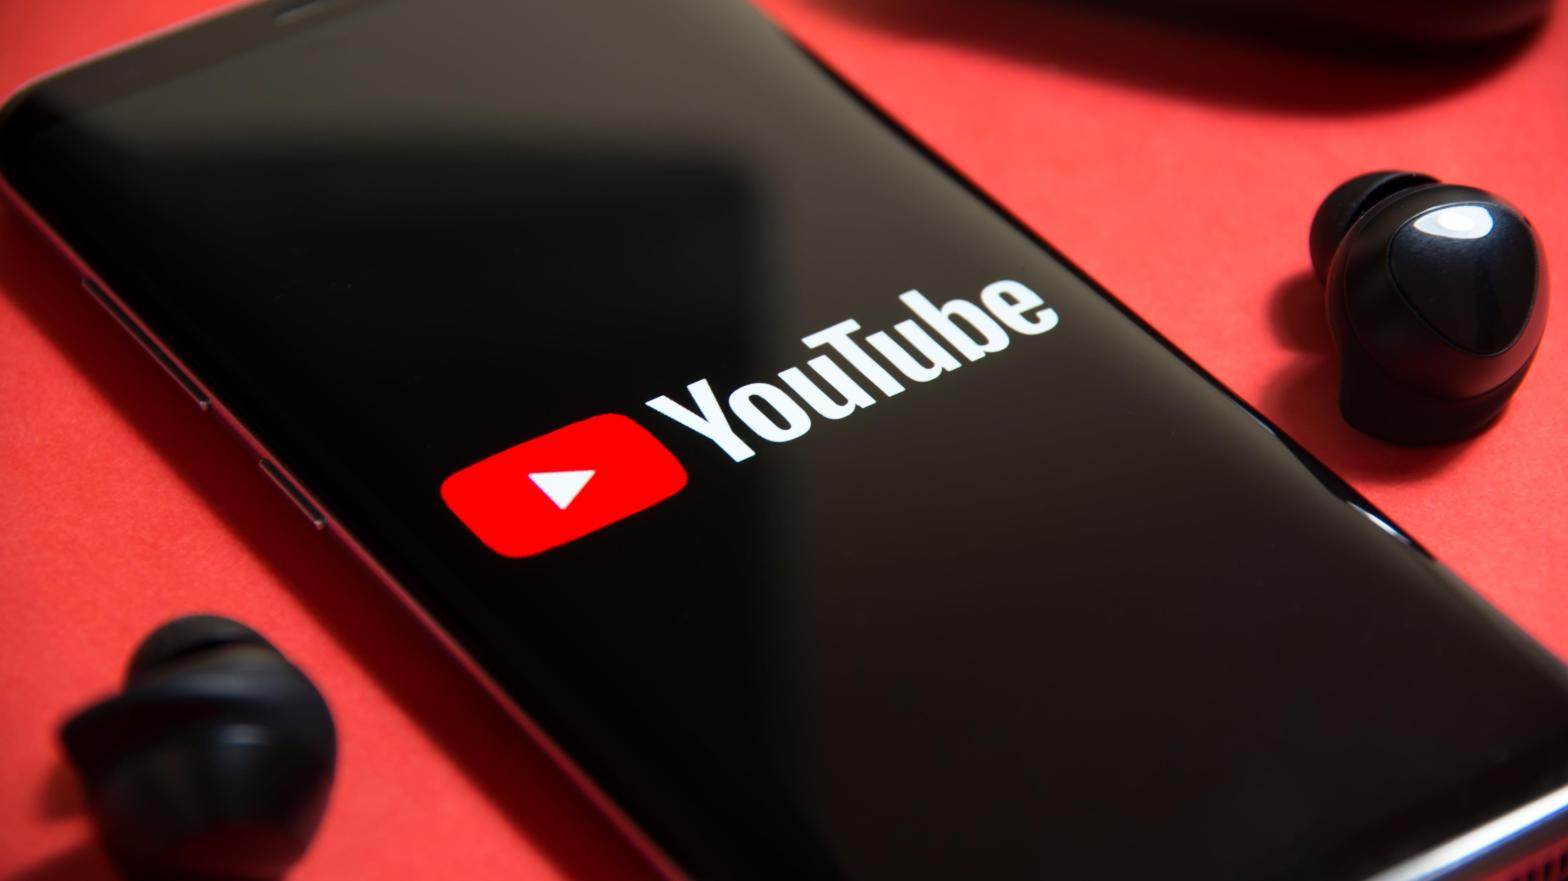 YouTube is whipping out another tool to hackle health misinformation on the platform. (Photo: Chubo - my masterpiece, Shutterstock)